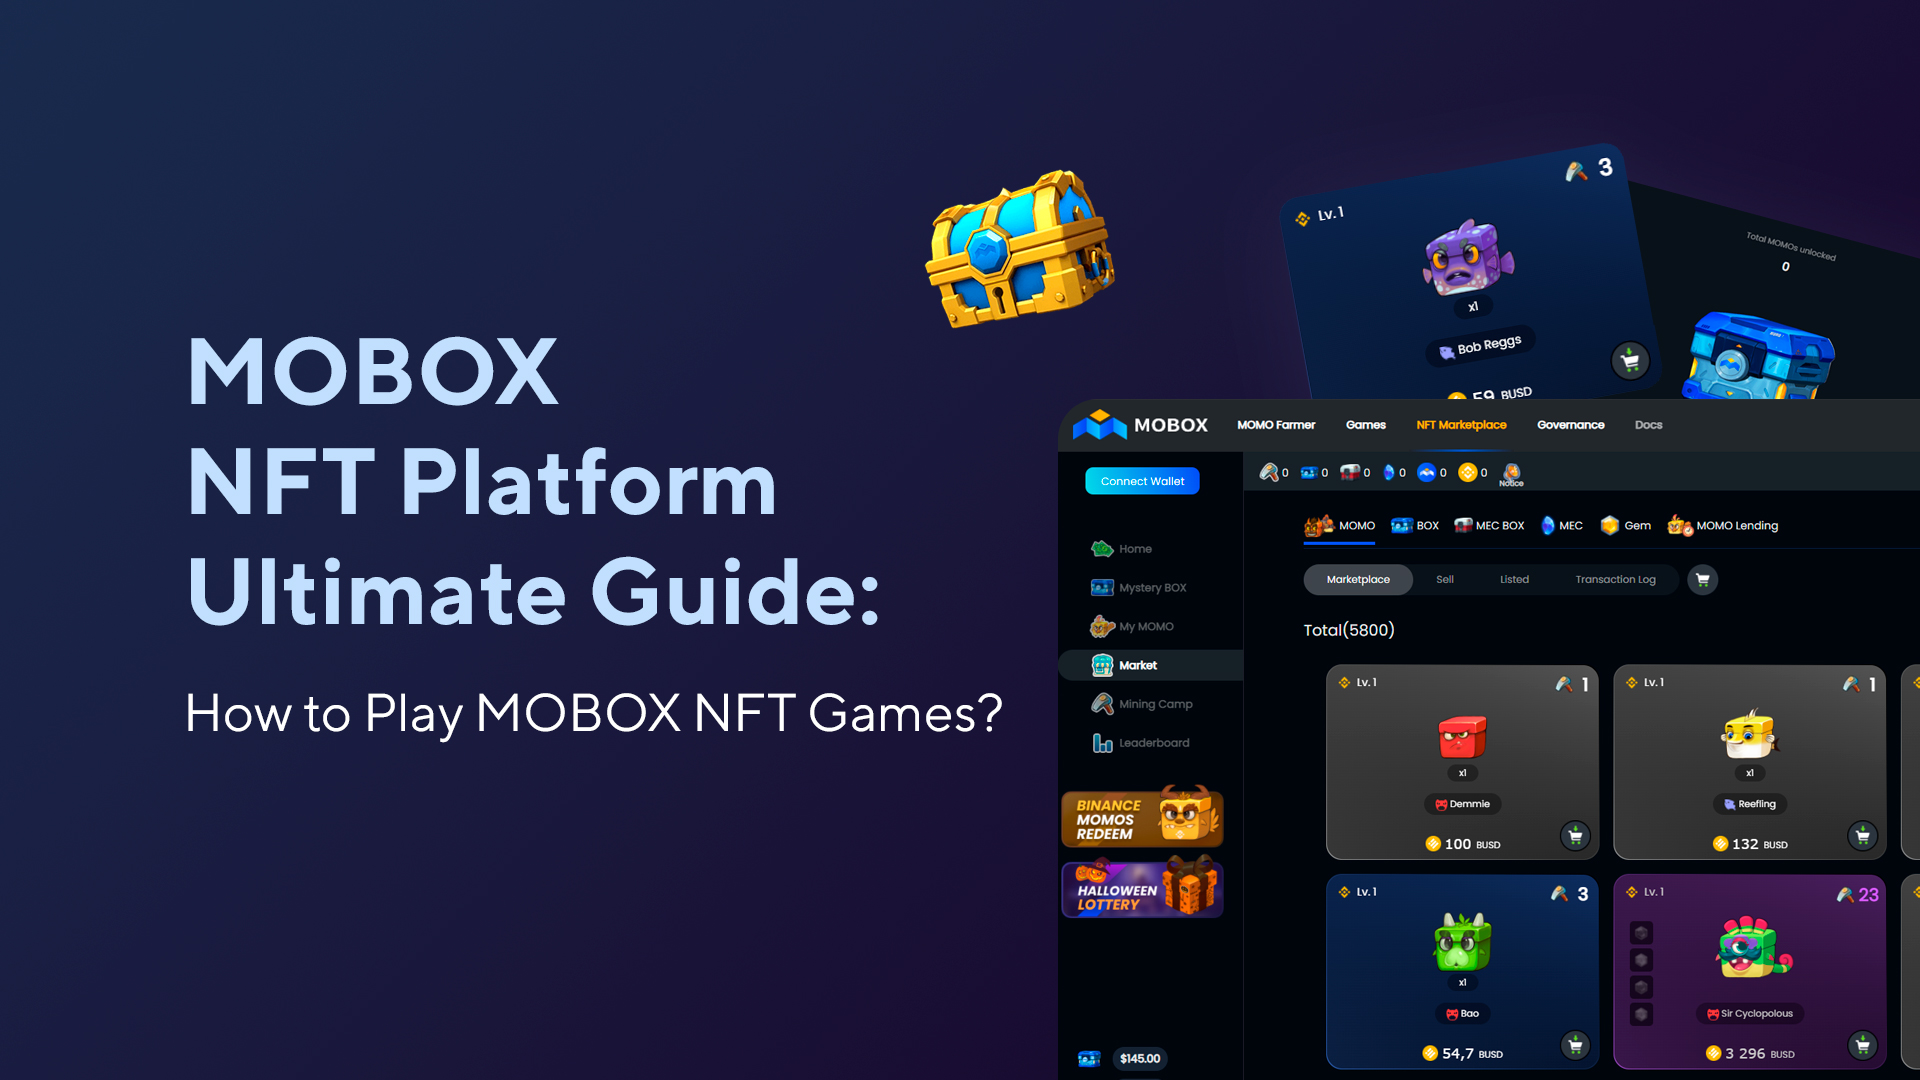 MOBOX NFT Platform Ultimate Guide: How to Play MOBOX Games?